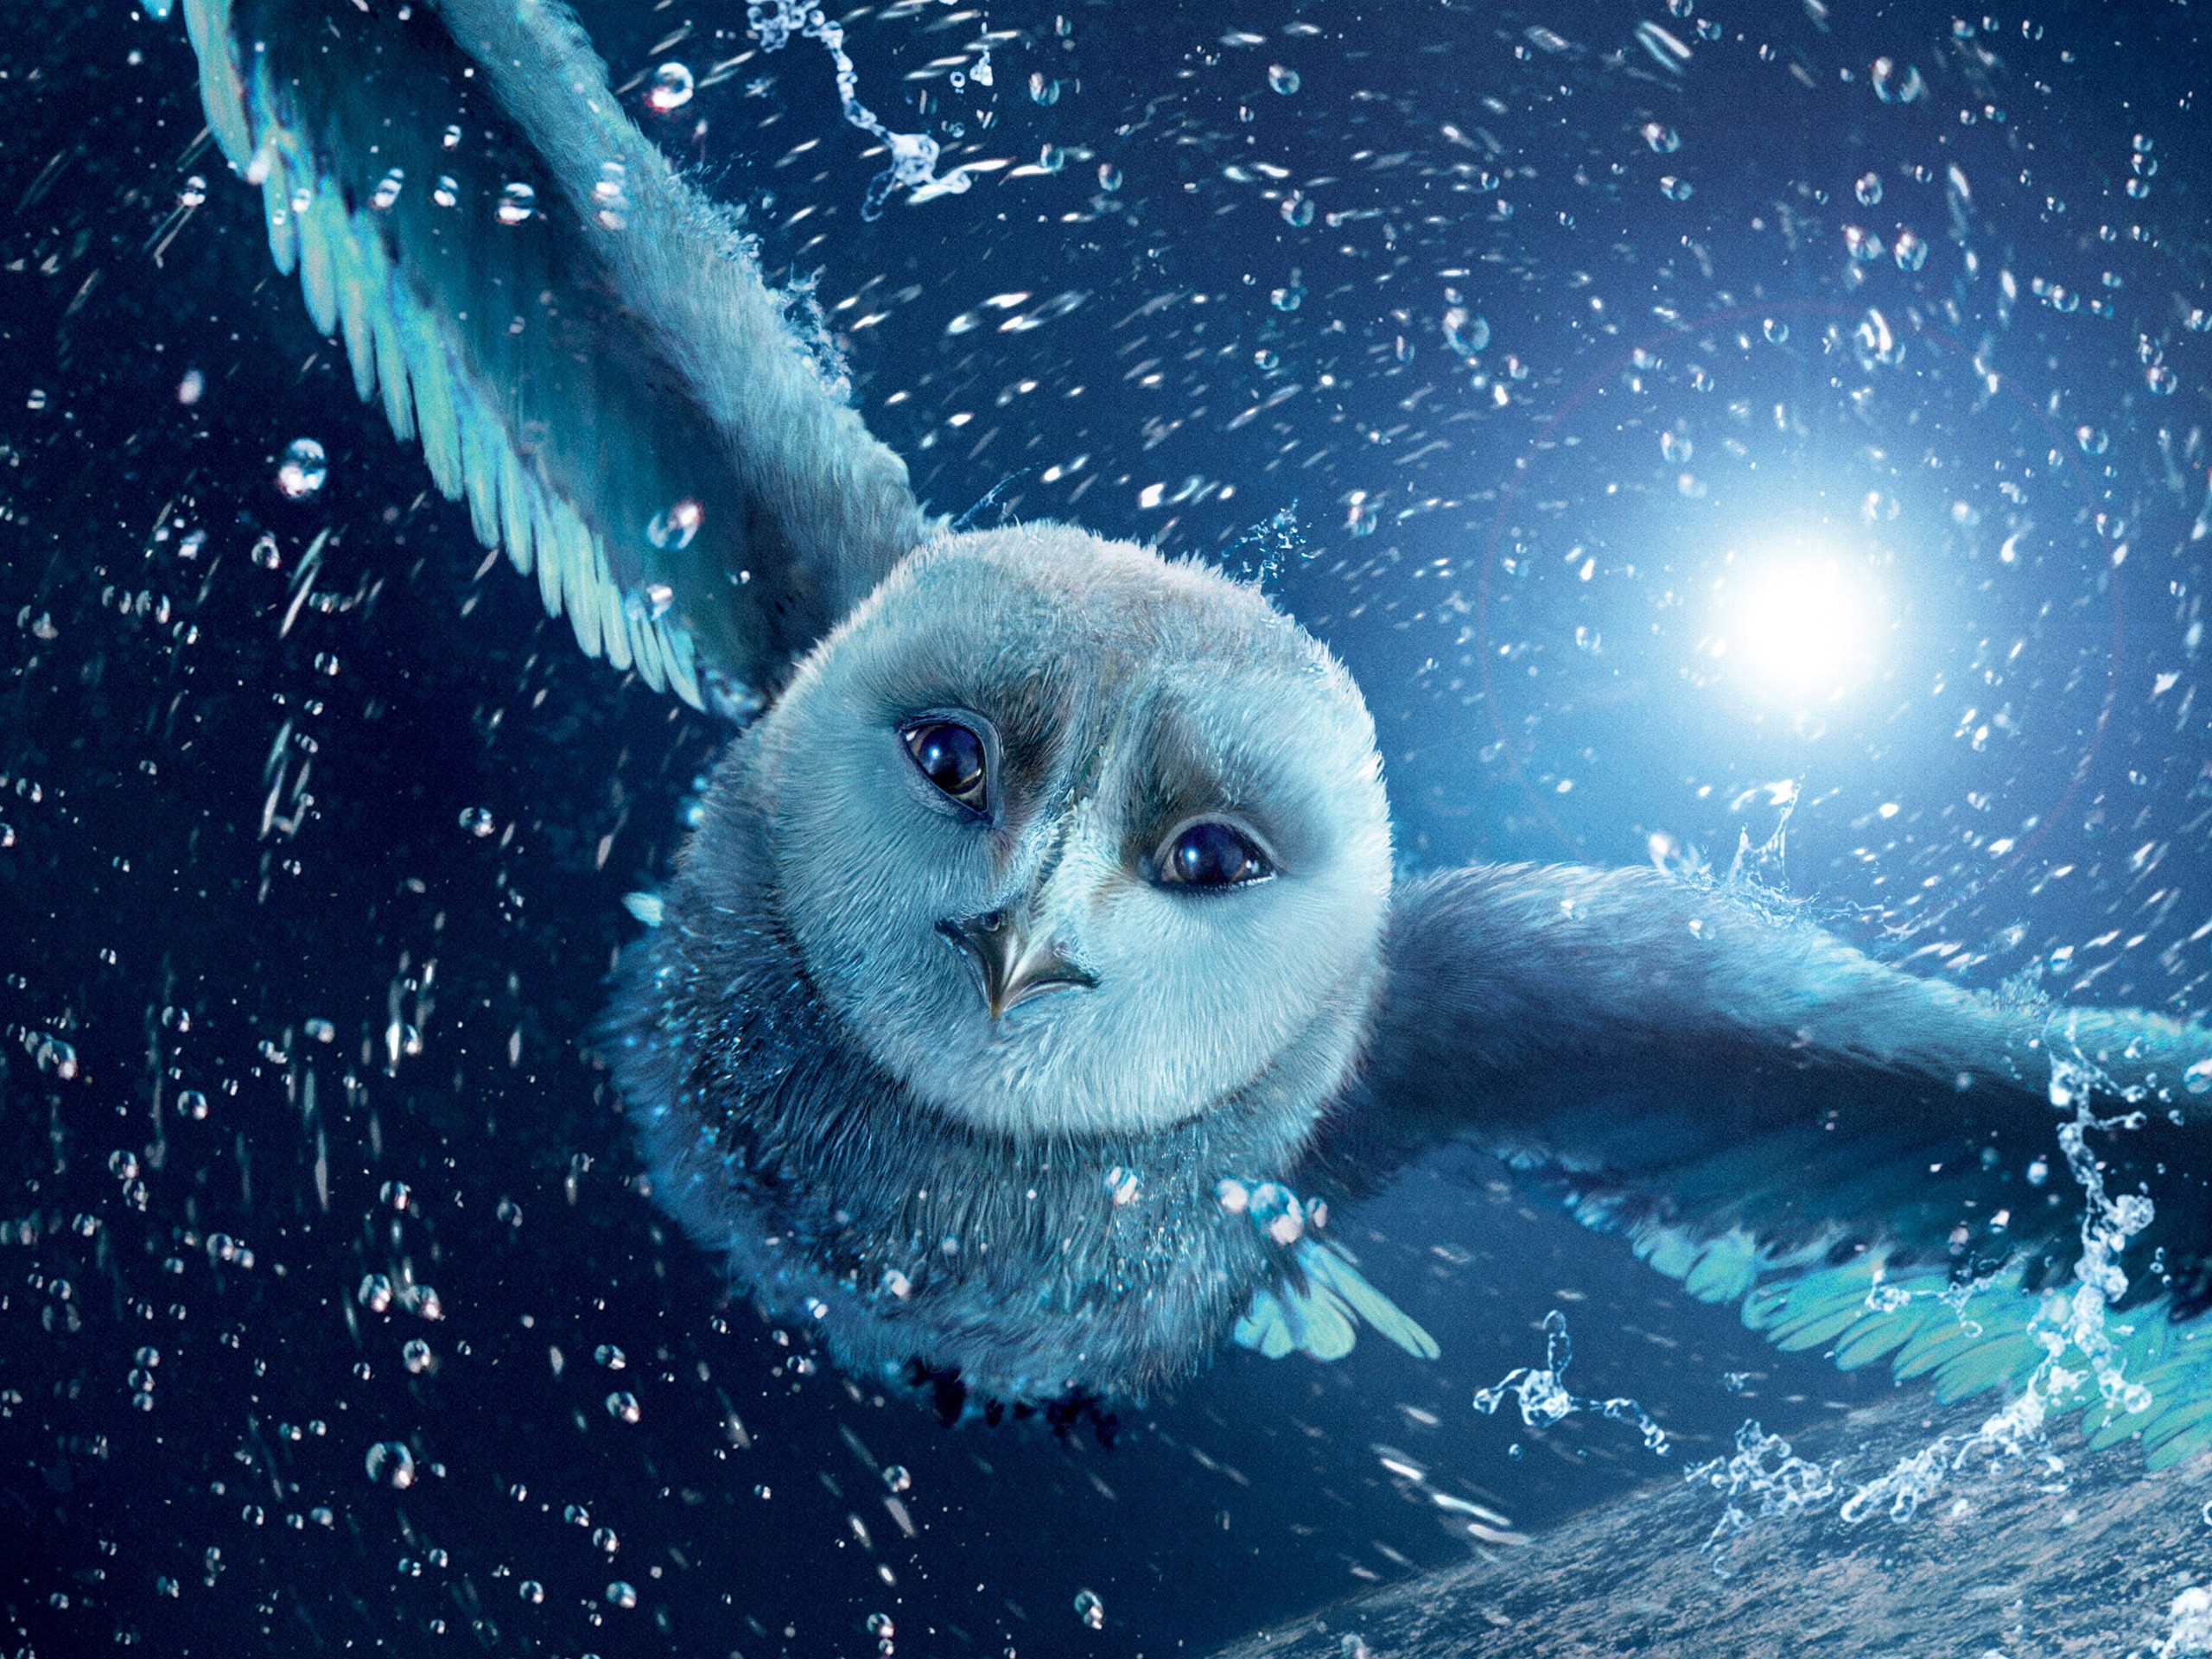 snow, Owls, Legend, Of, The, Guardians, Movie, Posters Wallpaper